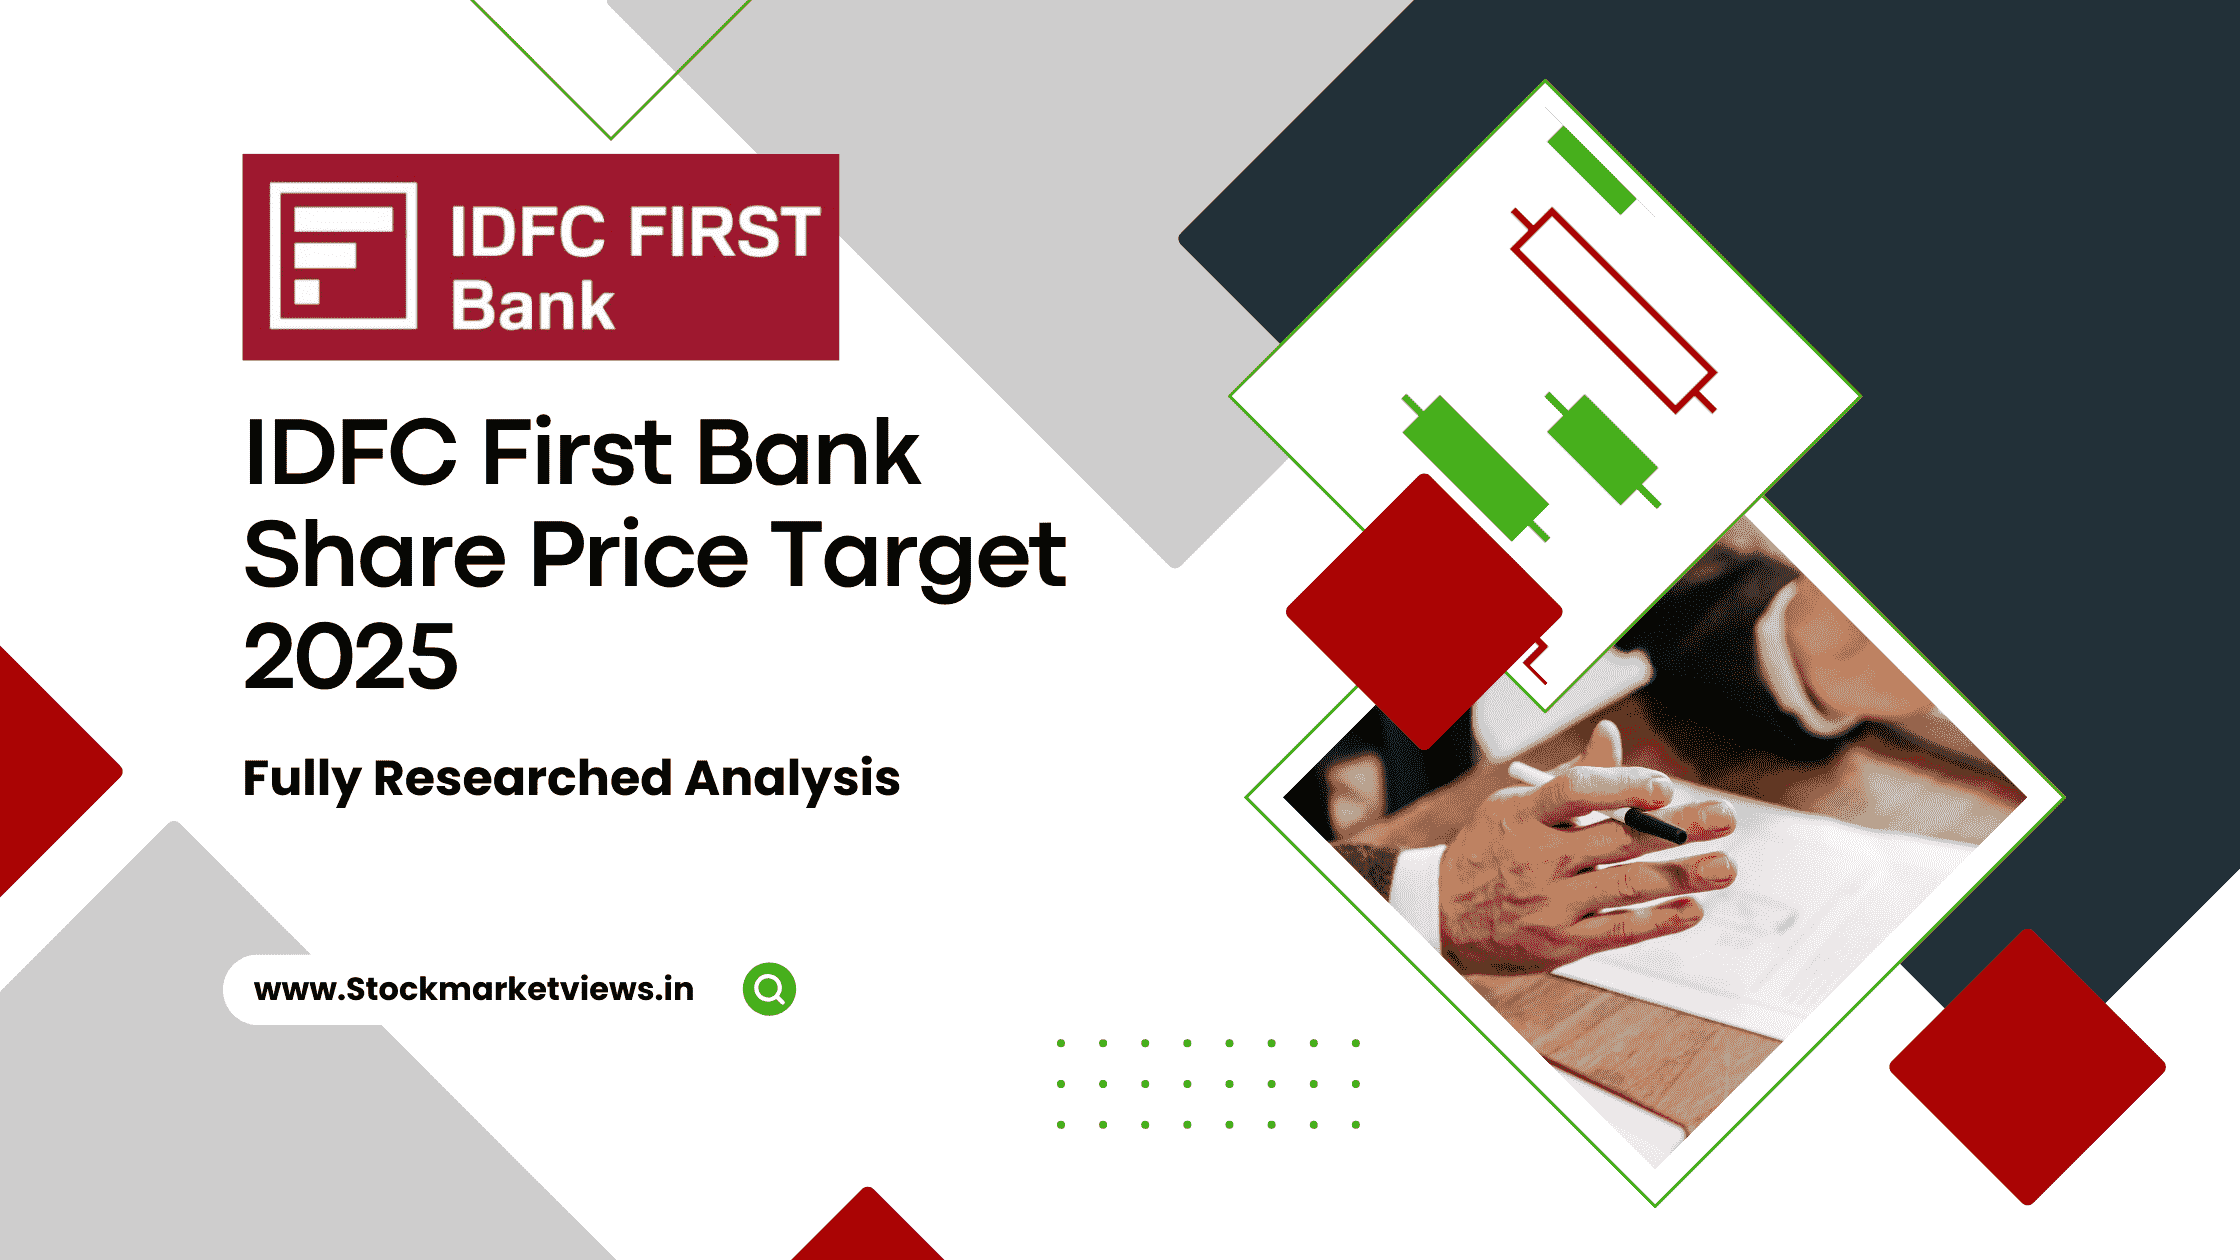 IDFC First bank Share Price Target 2025